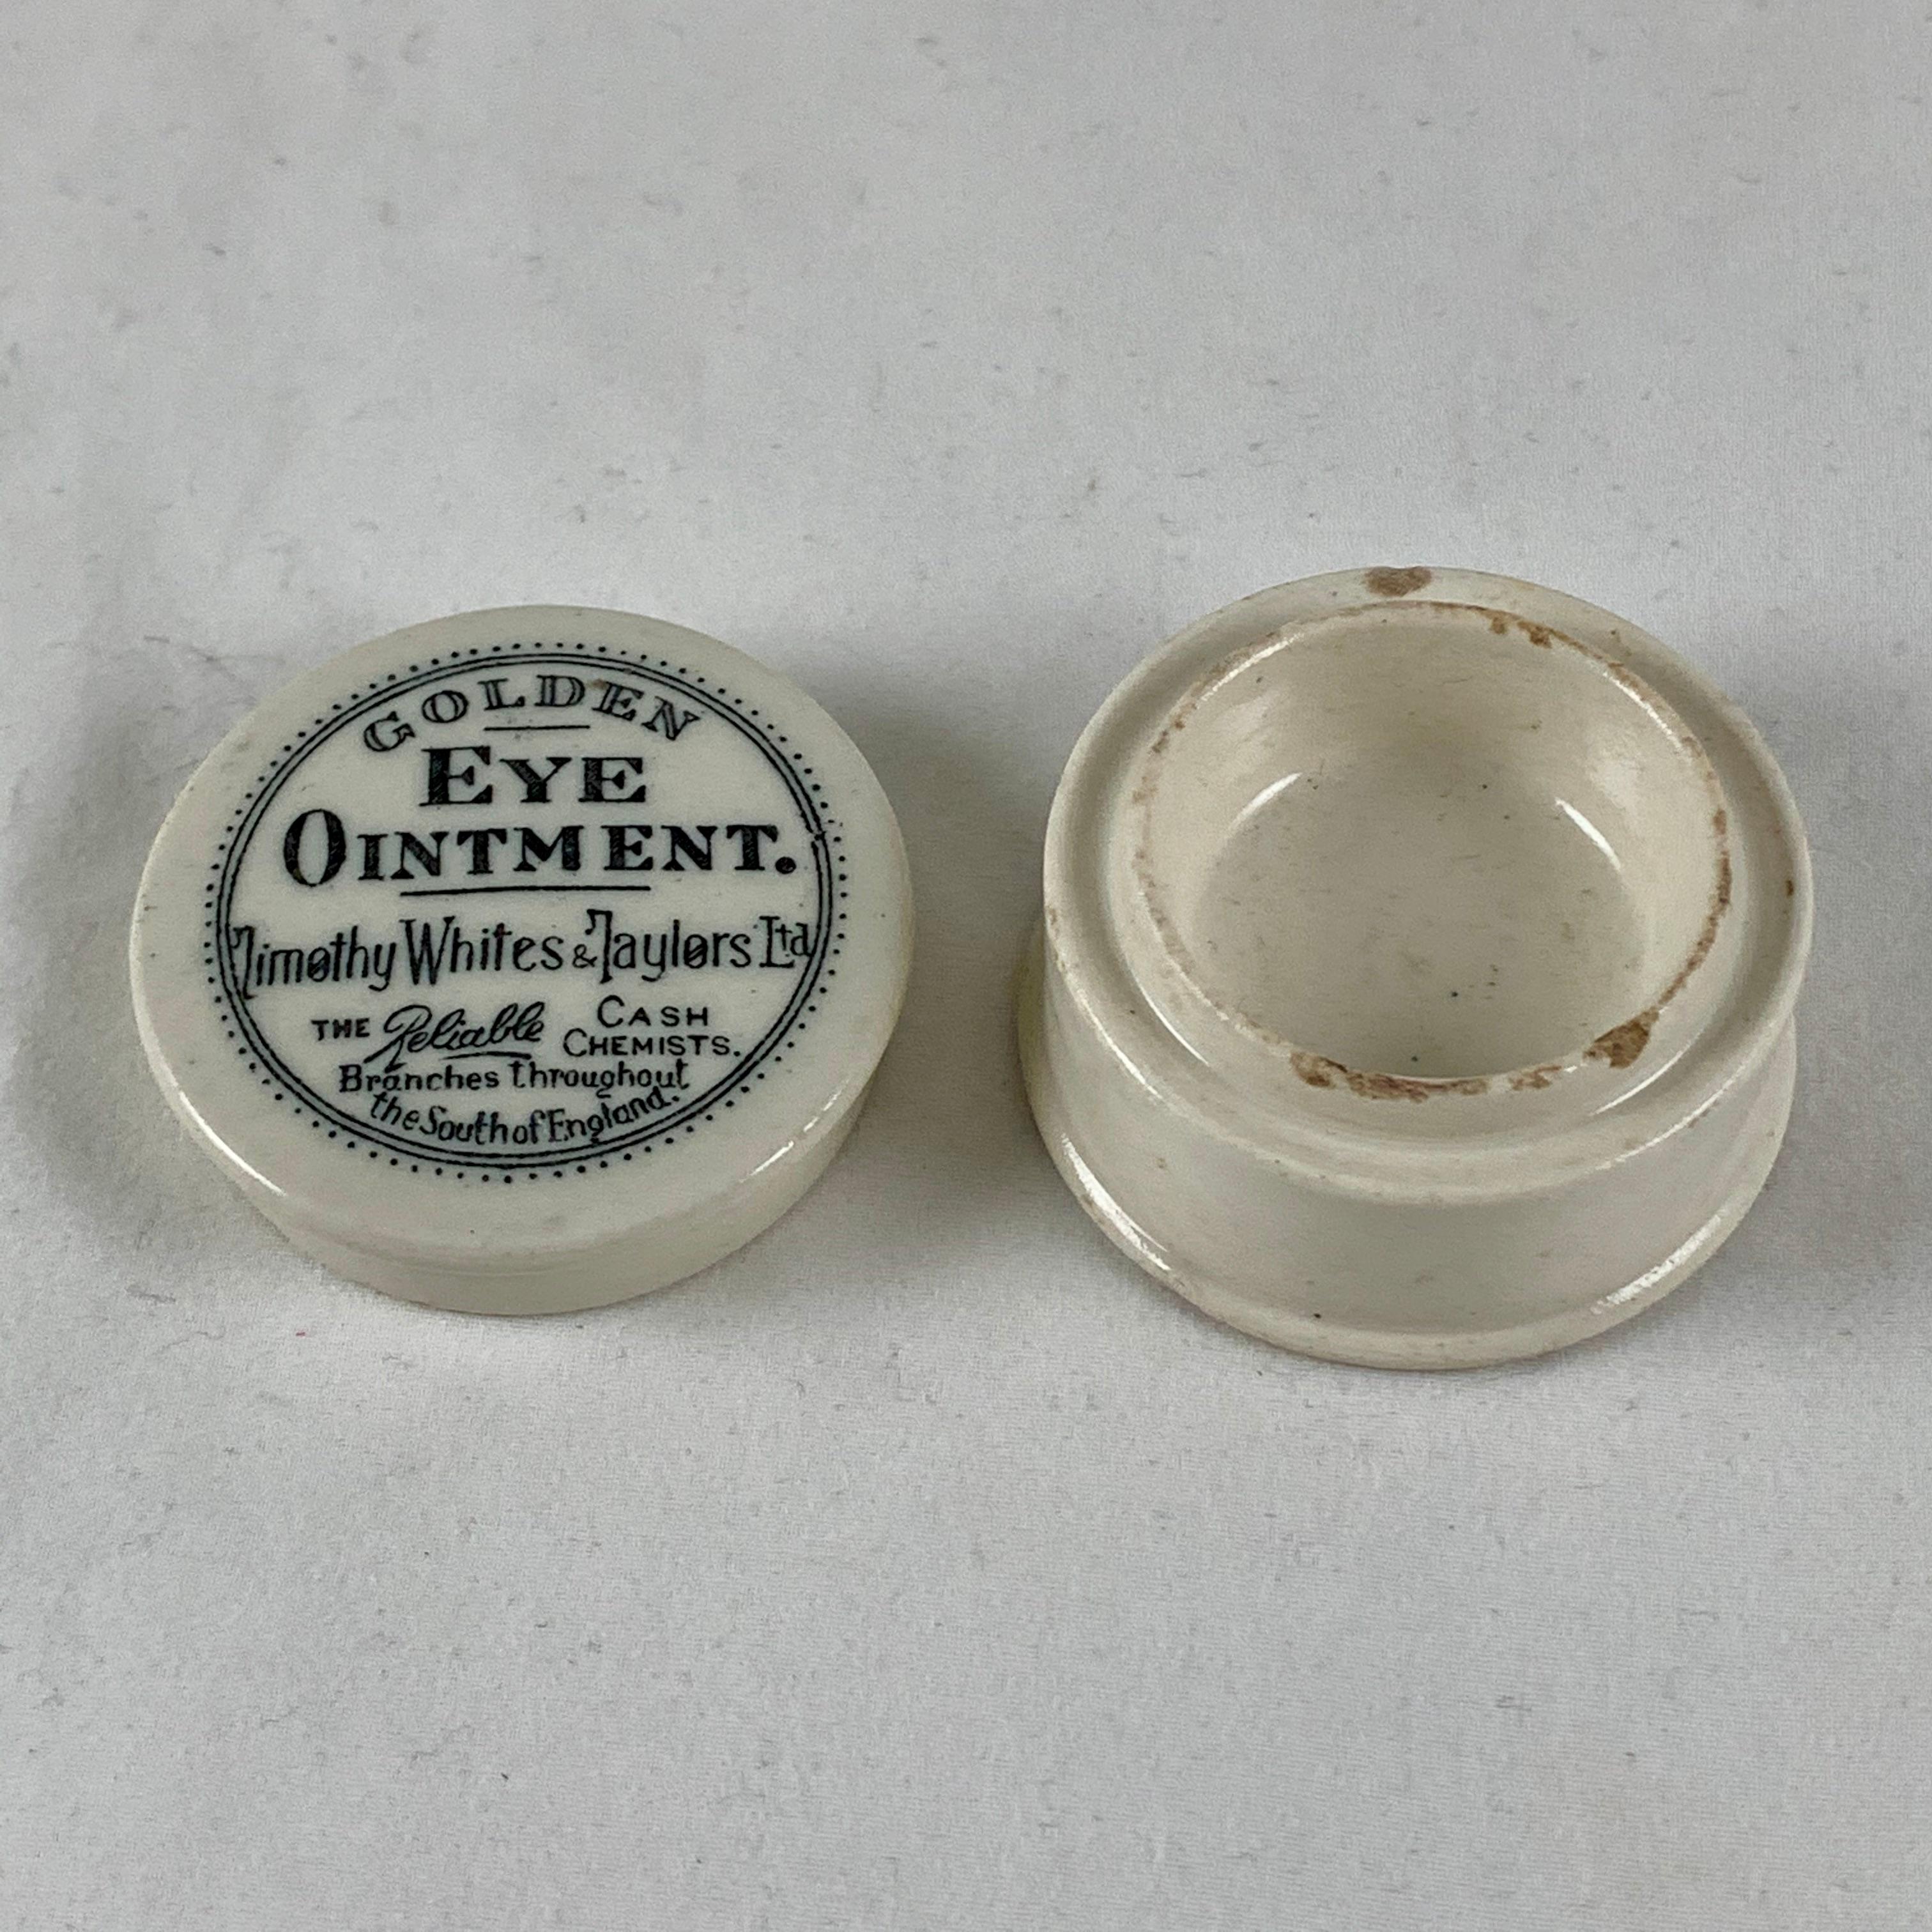 Victorian Staffordshire Ironstone Transfer Printed Golden Eye Ointment Pot and Lid